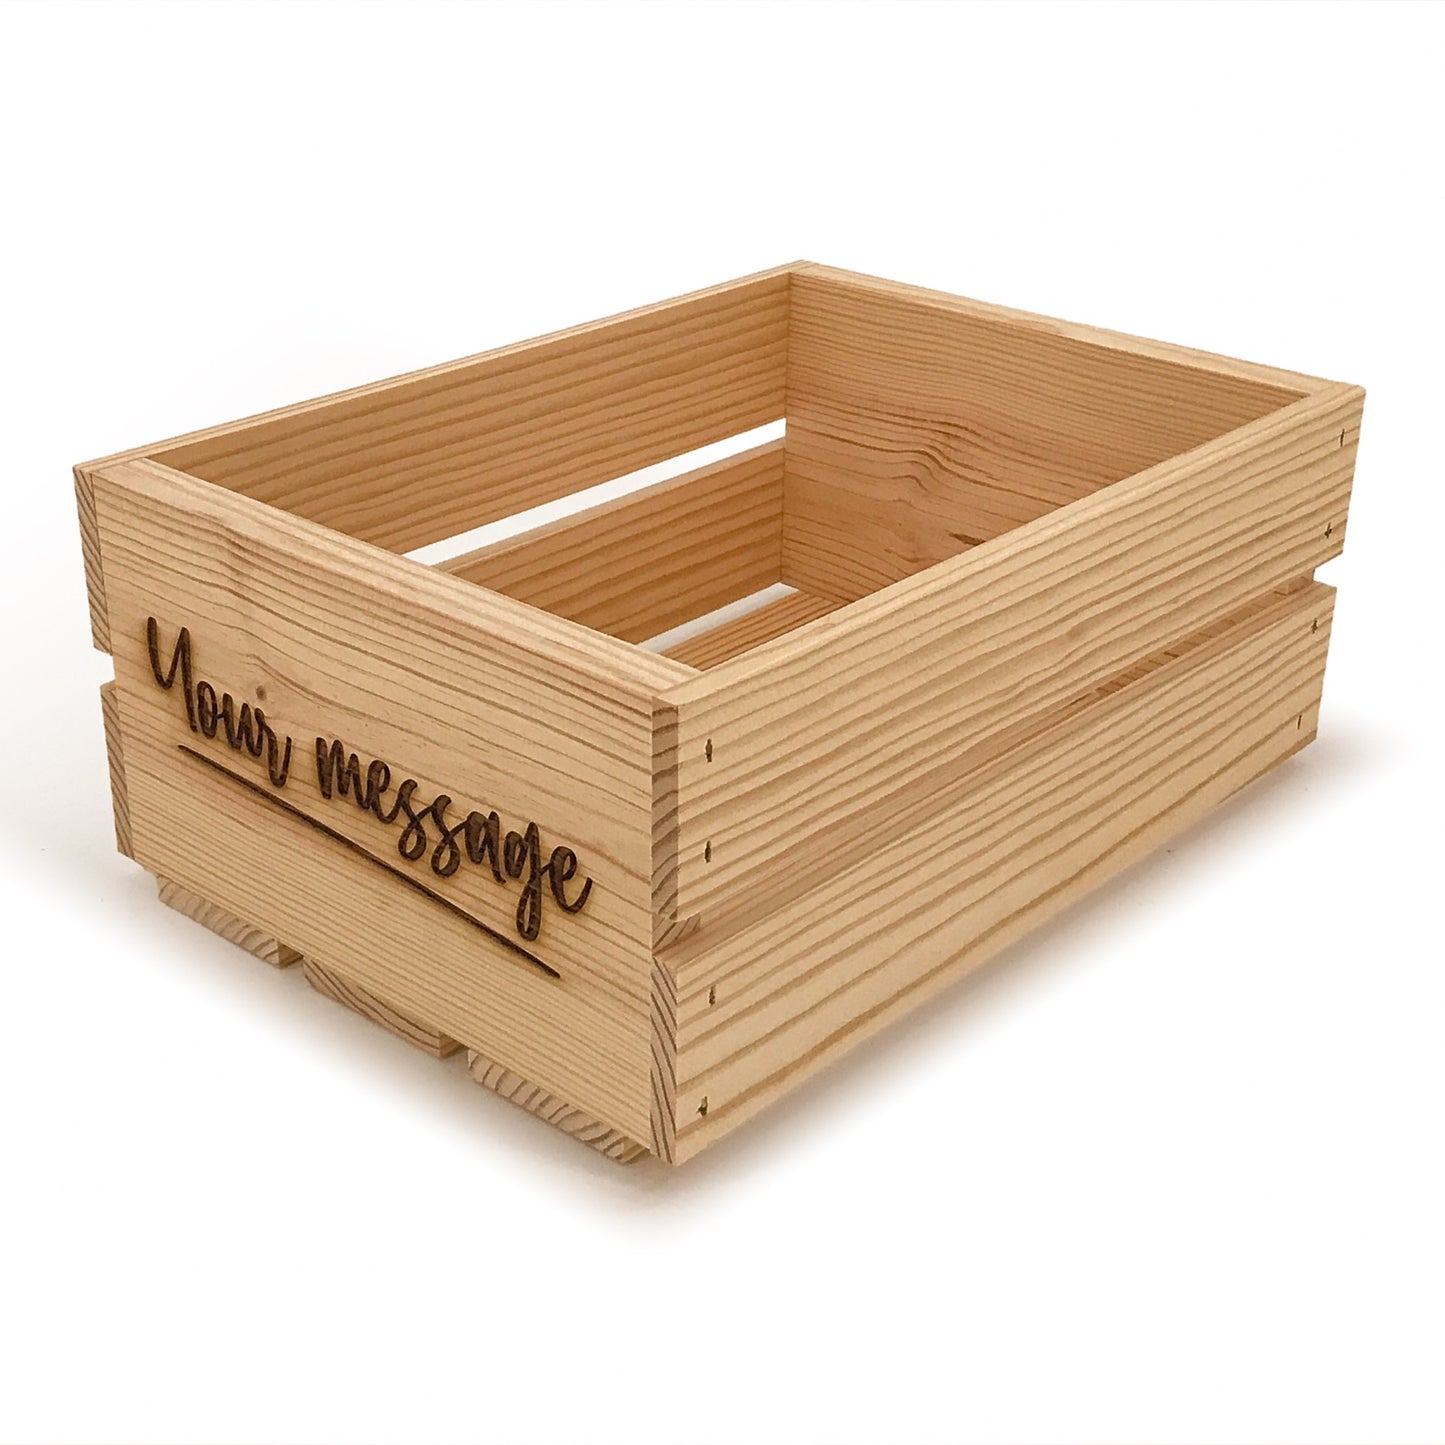 Small wooden crates with custom message 12x9x5.25, 6-WS-12-9-5.25-ST-NW-NL, 12-WS-12-9-5.25-ST-NW-NL, 24-WS-12-9-5.25-ST-NW-NL, 48-WS-12-9-5.25-ST-NW-NL, 96-WS-12-9-5.25-ST-NW-NL